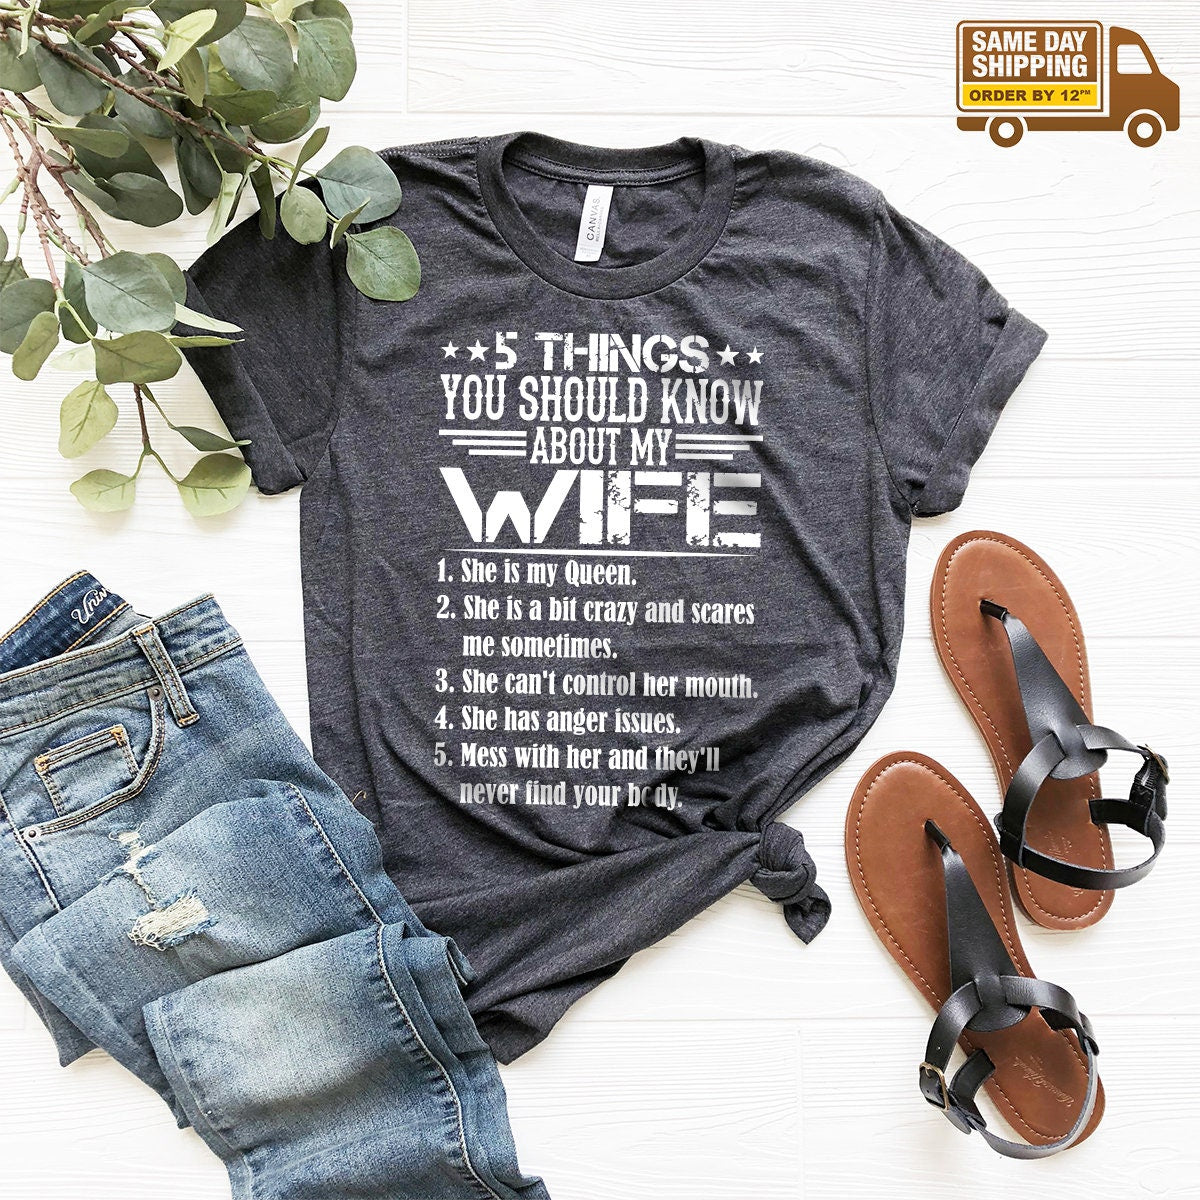 Husband And Wife Shirt, Funny Husband Gift, Funny Wife T Shirt, 5 Things You Should Know About My Wife T-Shirt, Best Husband Shirt - Fastdeliverytees.com